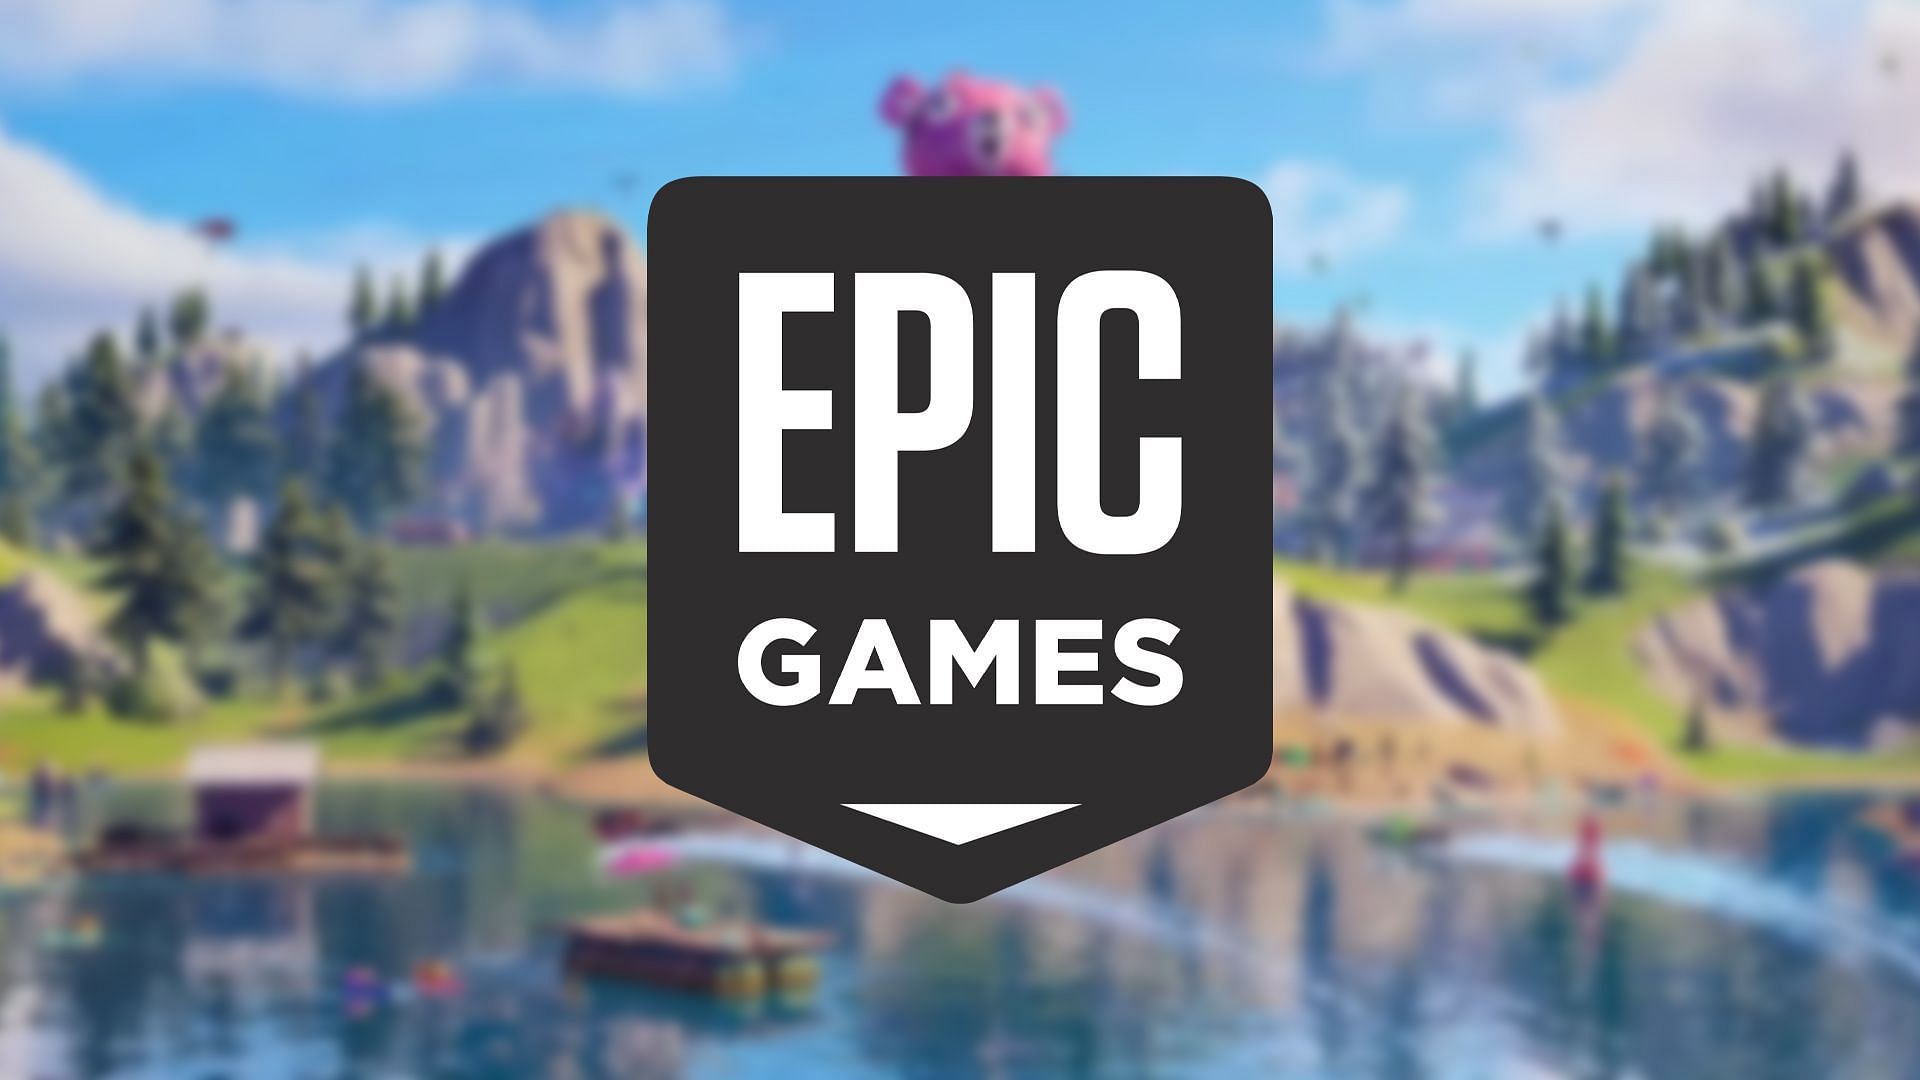 Epic Games to take a summer break; Fortnite unlikely to get major updates